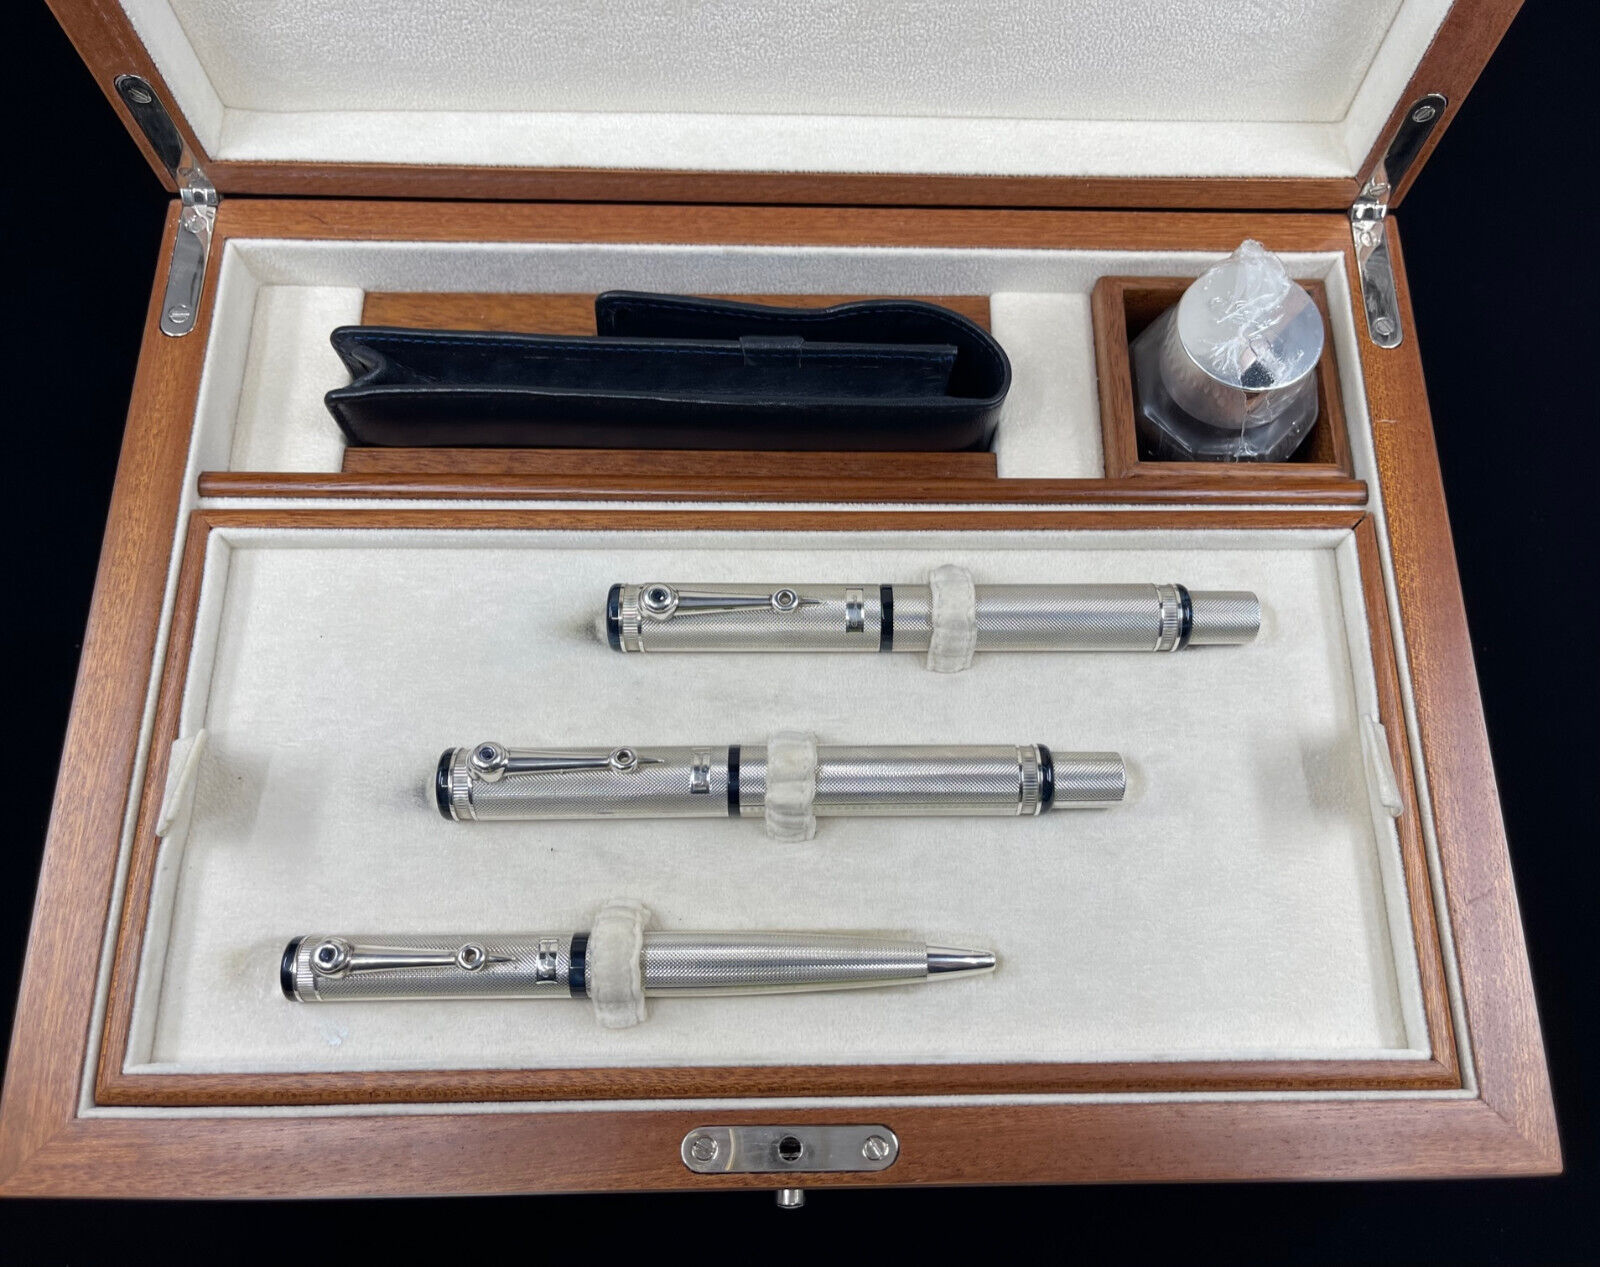 MONTEGRAPPA for BREGUET Classique Set of 3 Limited Edition Pens FP RB BP #607